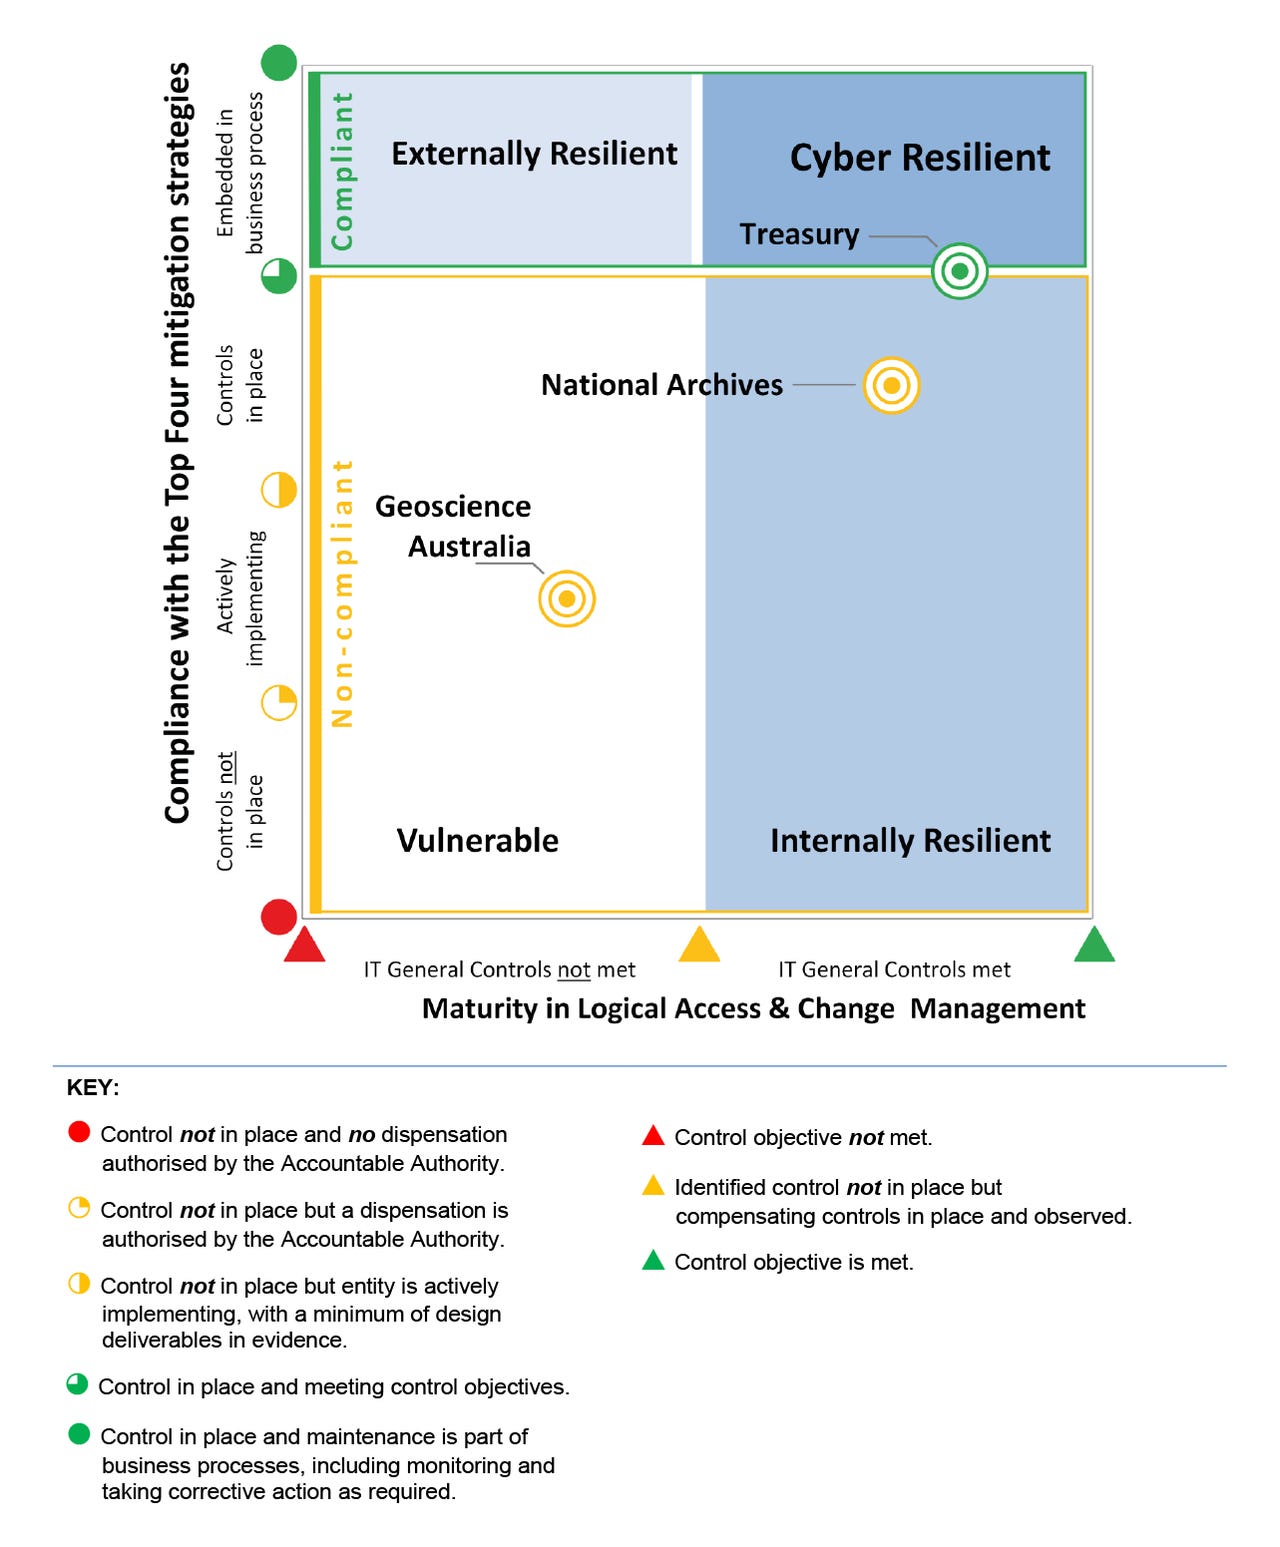 anao-cyber-report-2018-2019.png